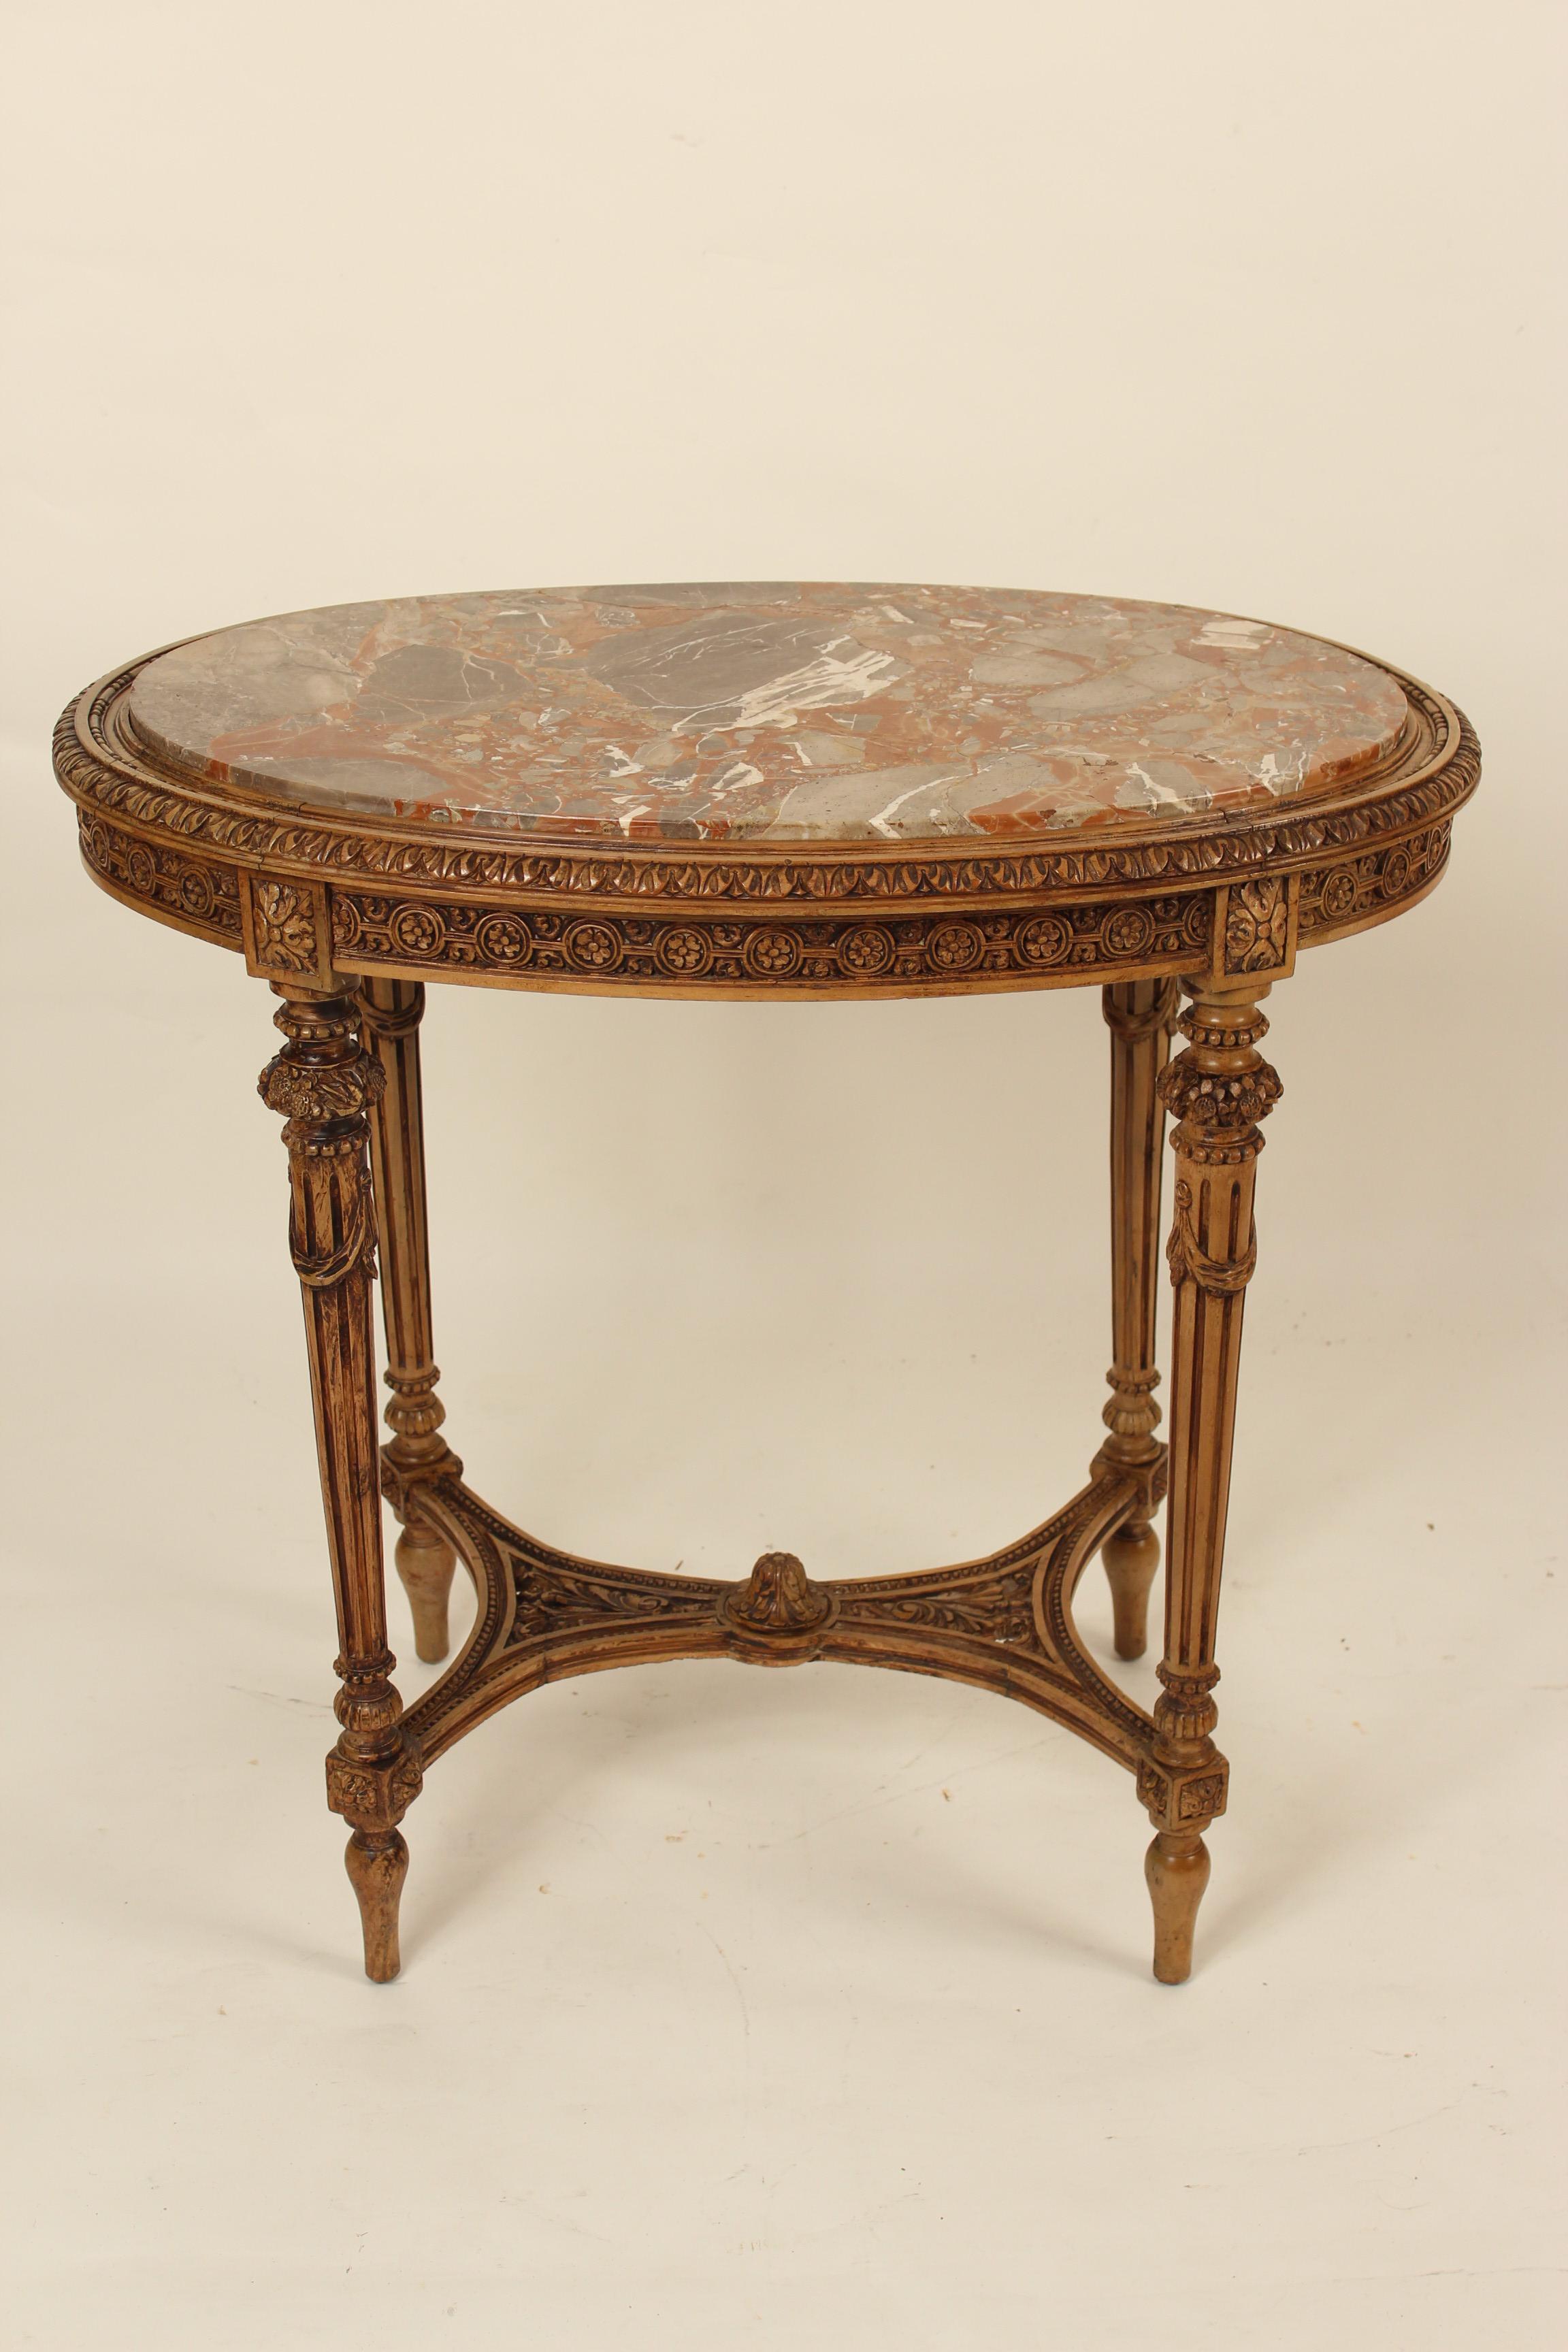 Louis XVI style carved oval beechwood occasional table with marble top, circa 1930. Exquisite carving on this table.